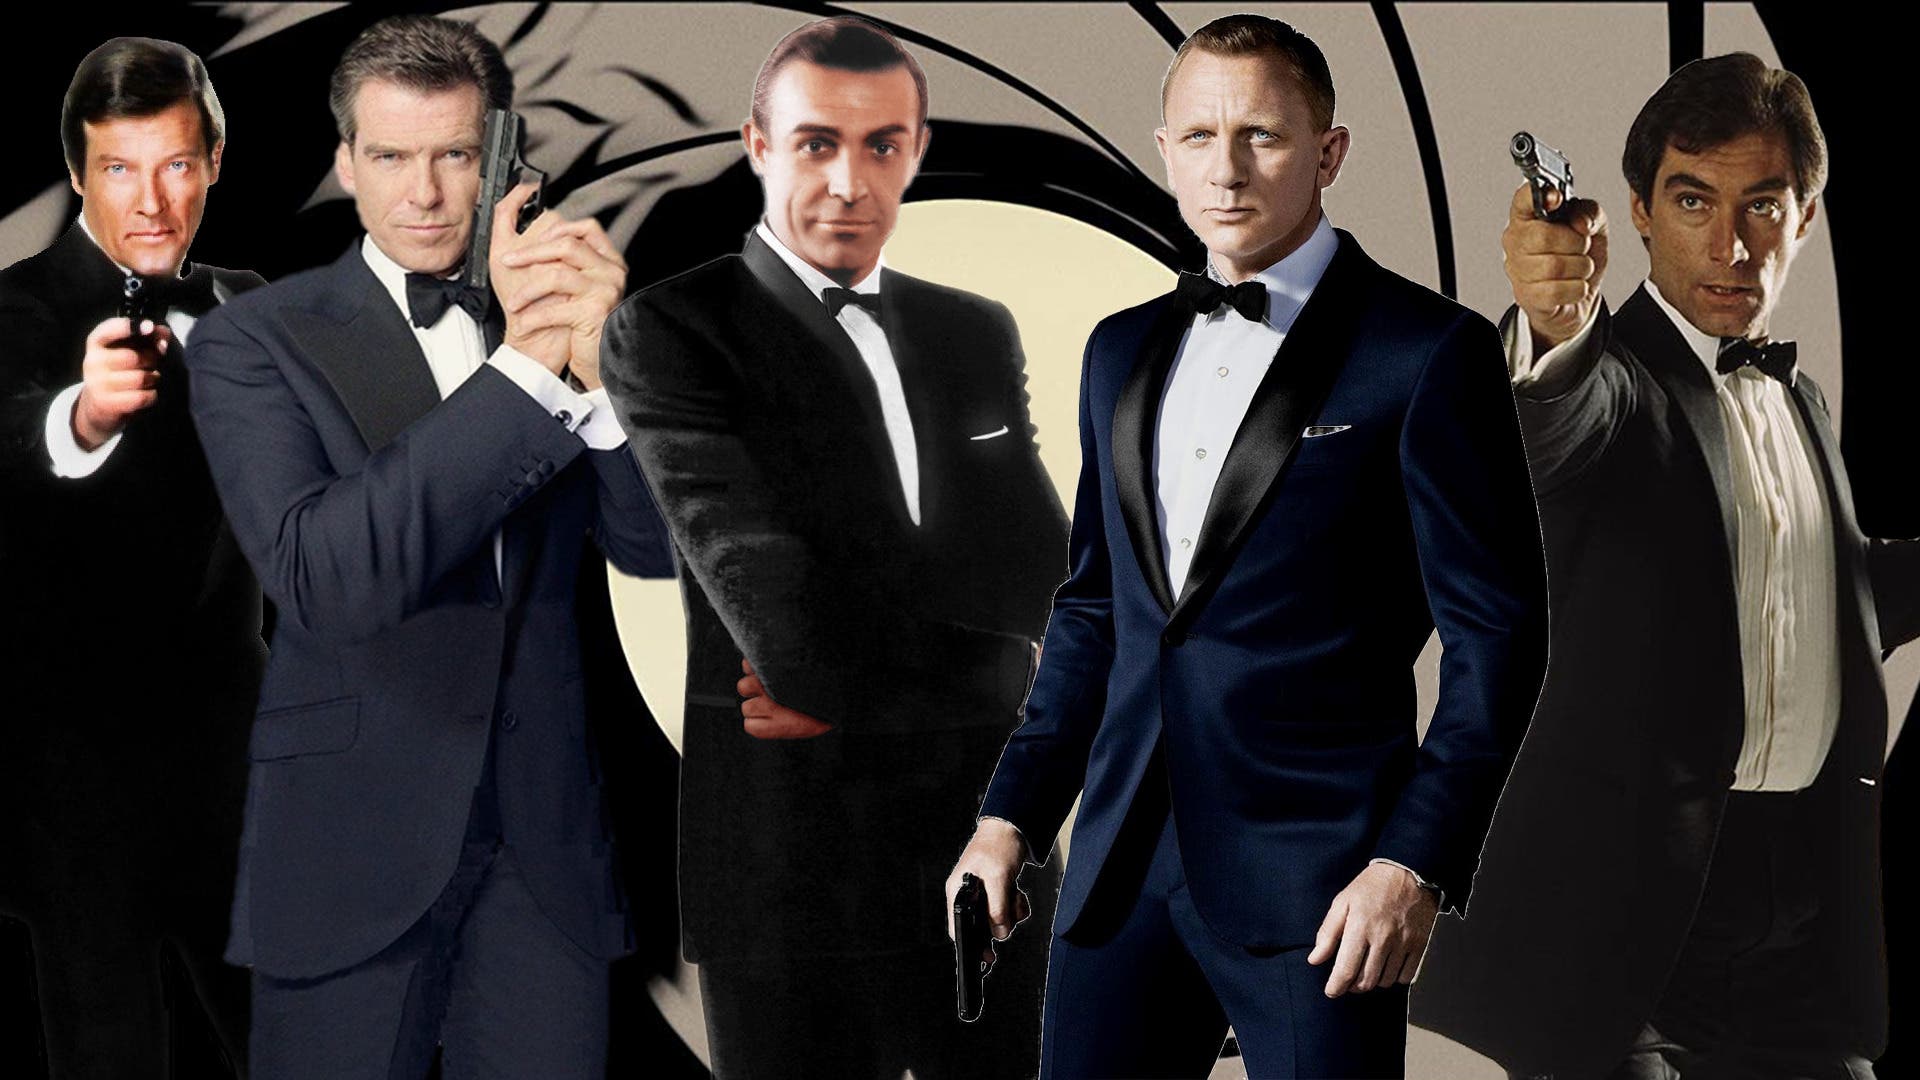 In what order to watch the James Bond 007 films: release and chronological order